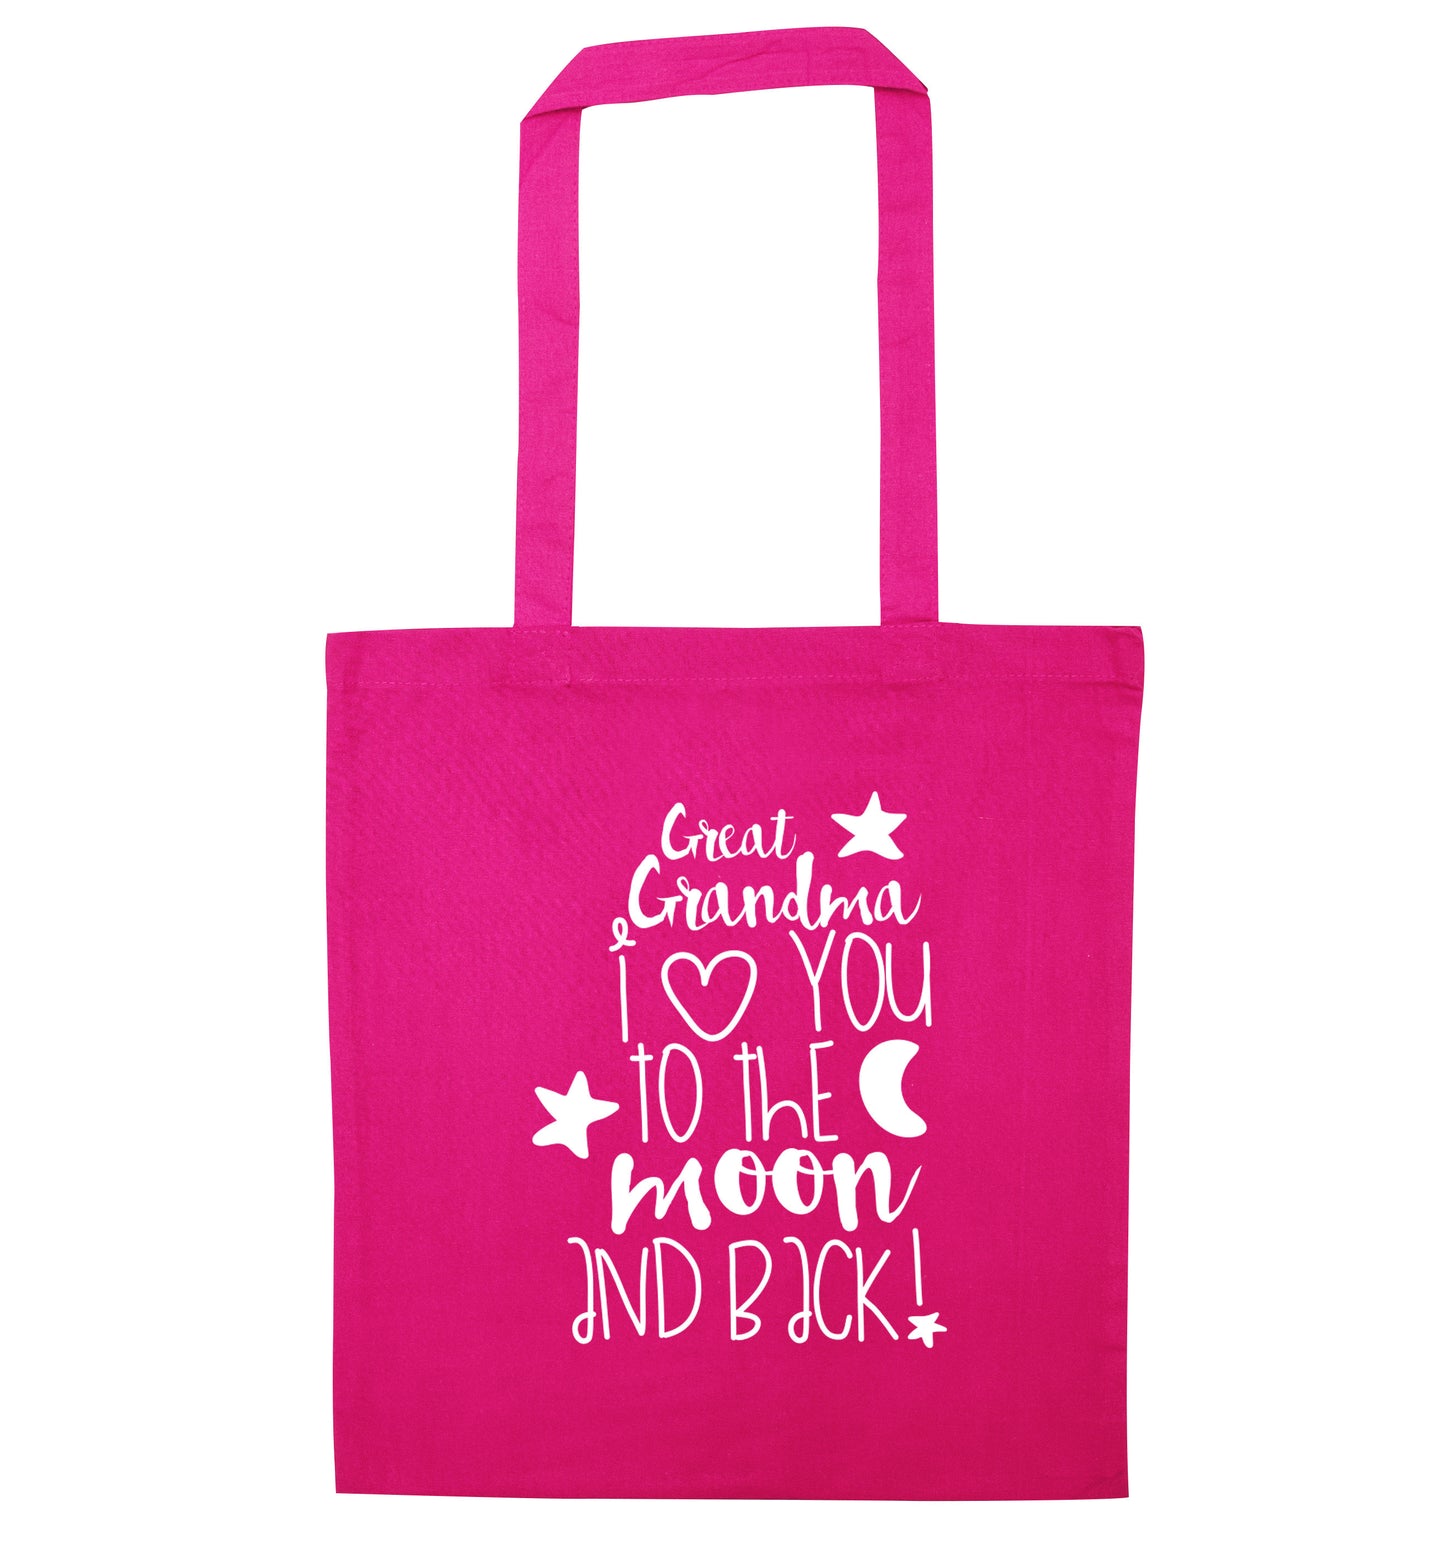 Great Grandma I love you to the moon and back pink tote bag